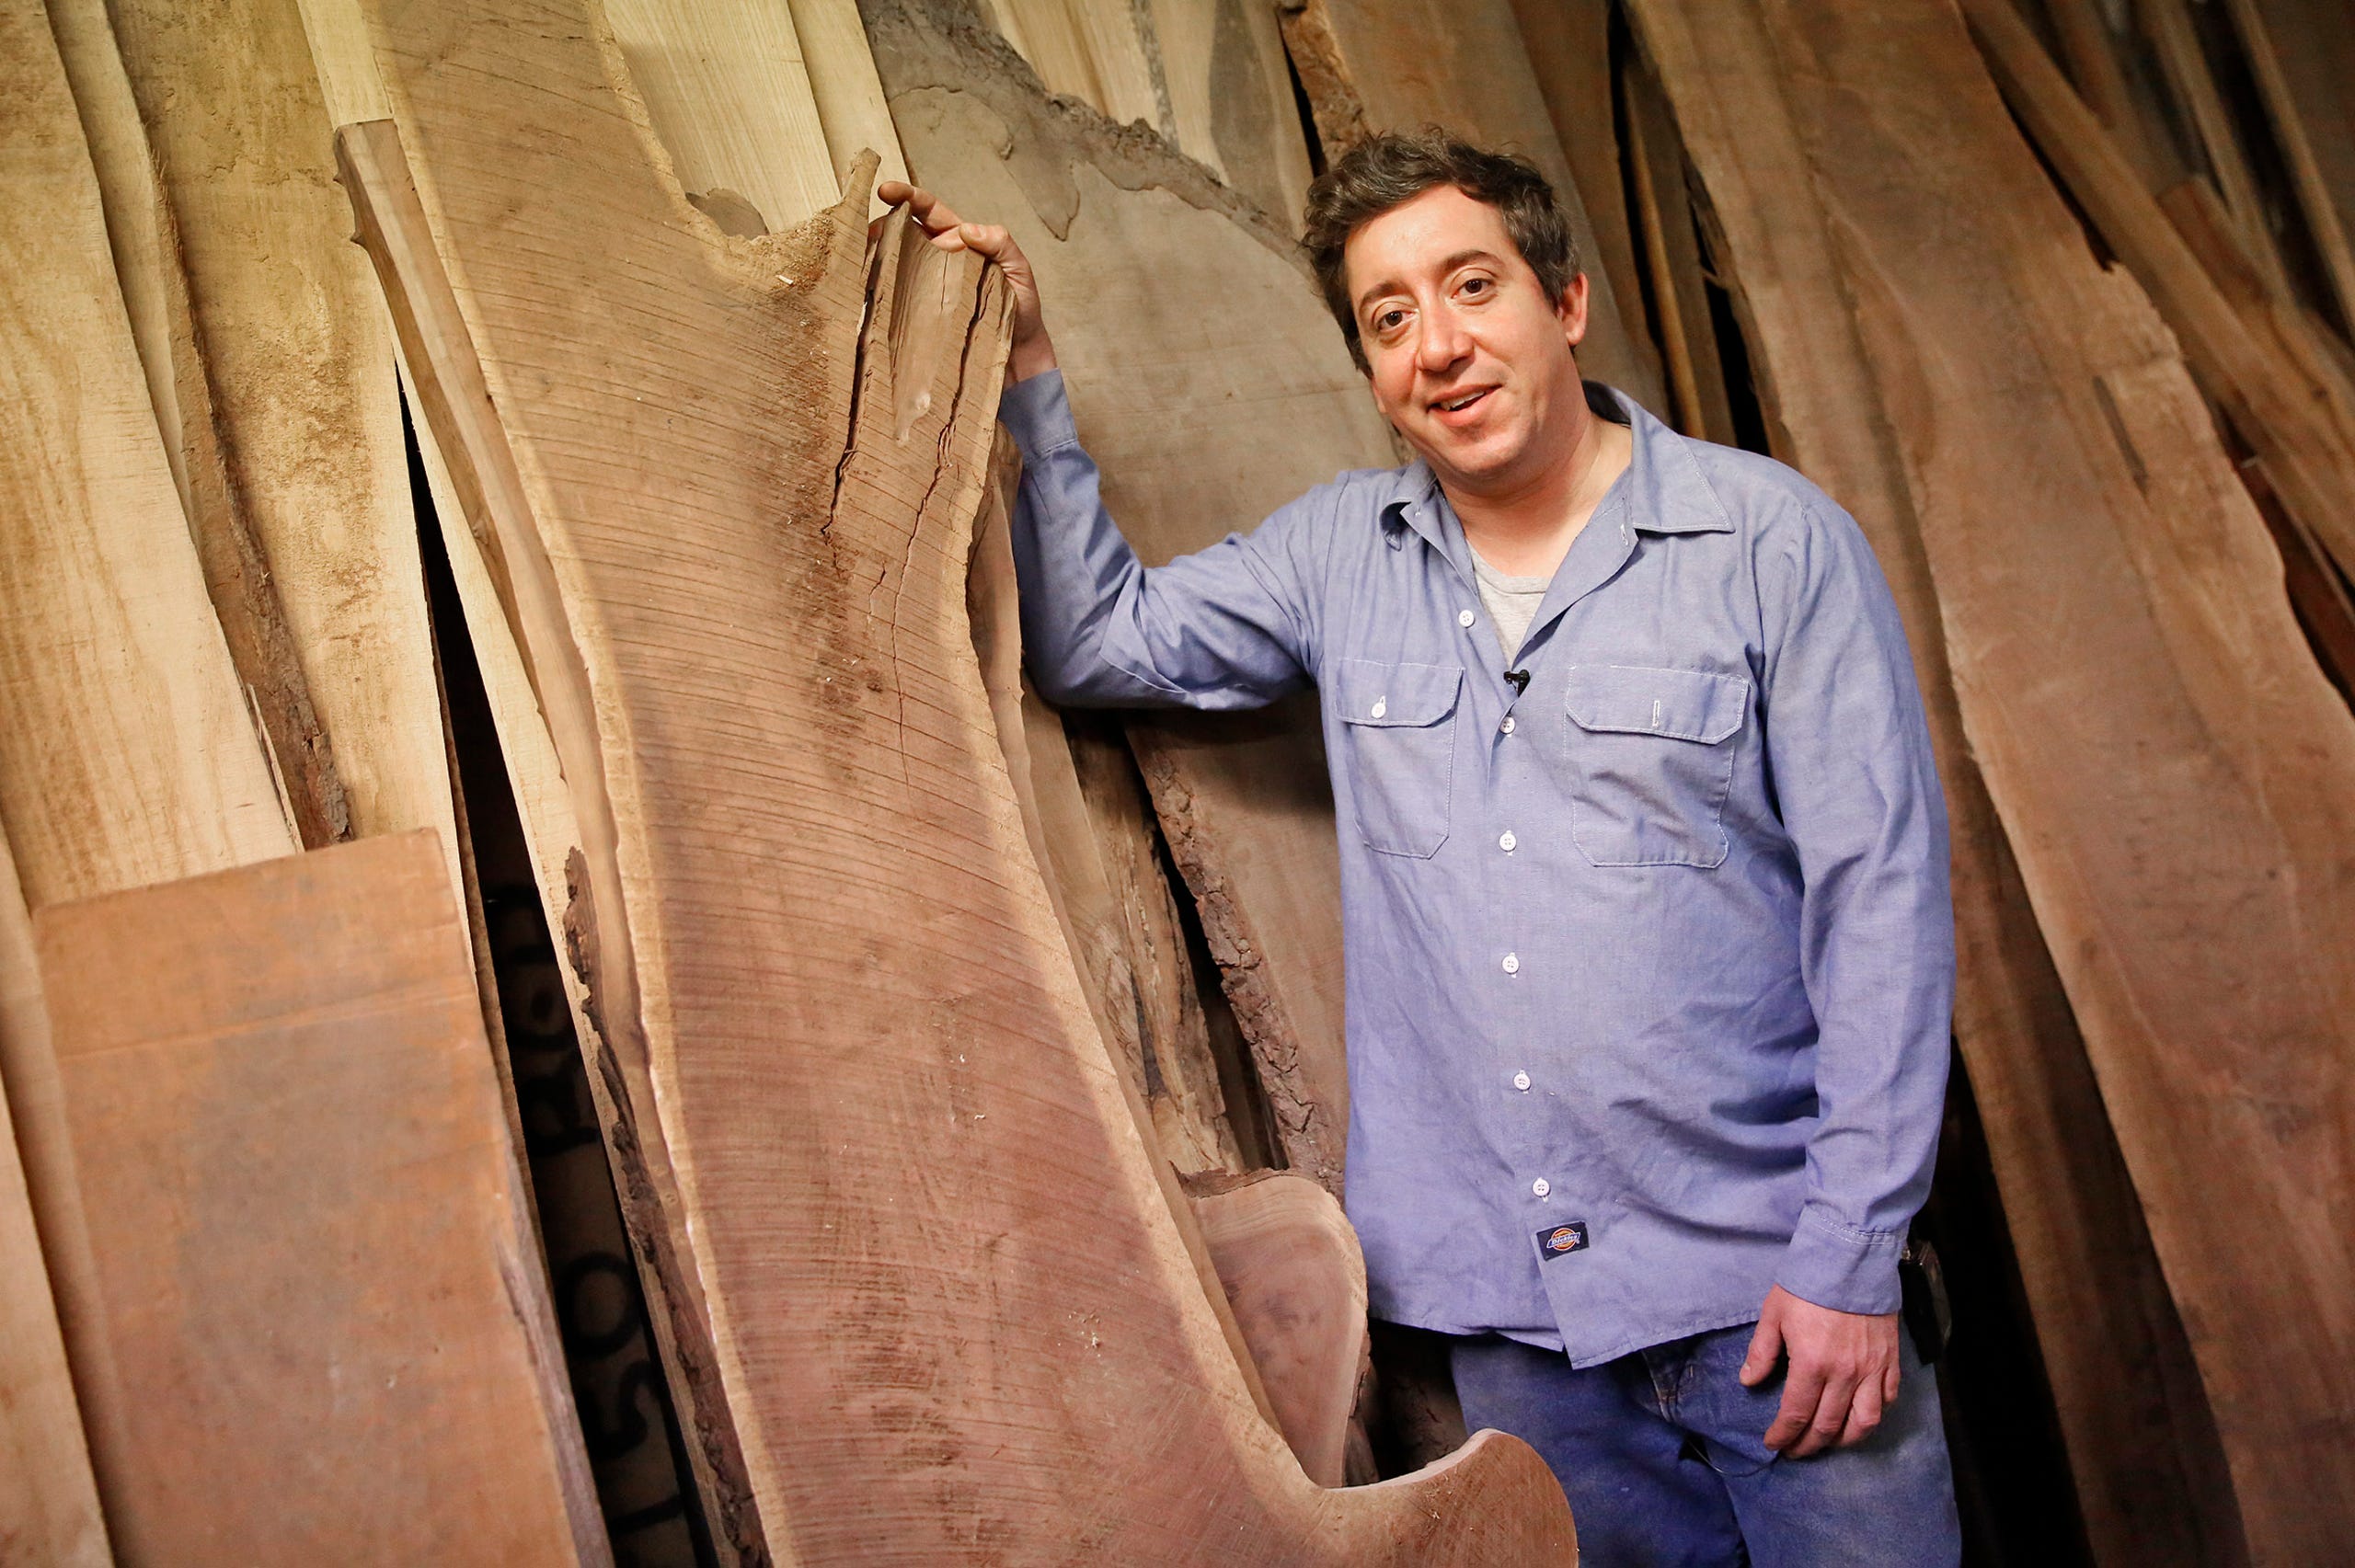 Brian Presnell Looks To Mill Urban Trees Into Recycled Art